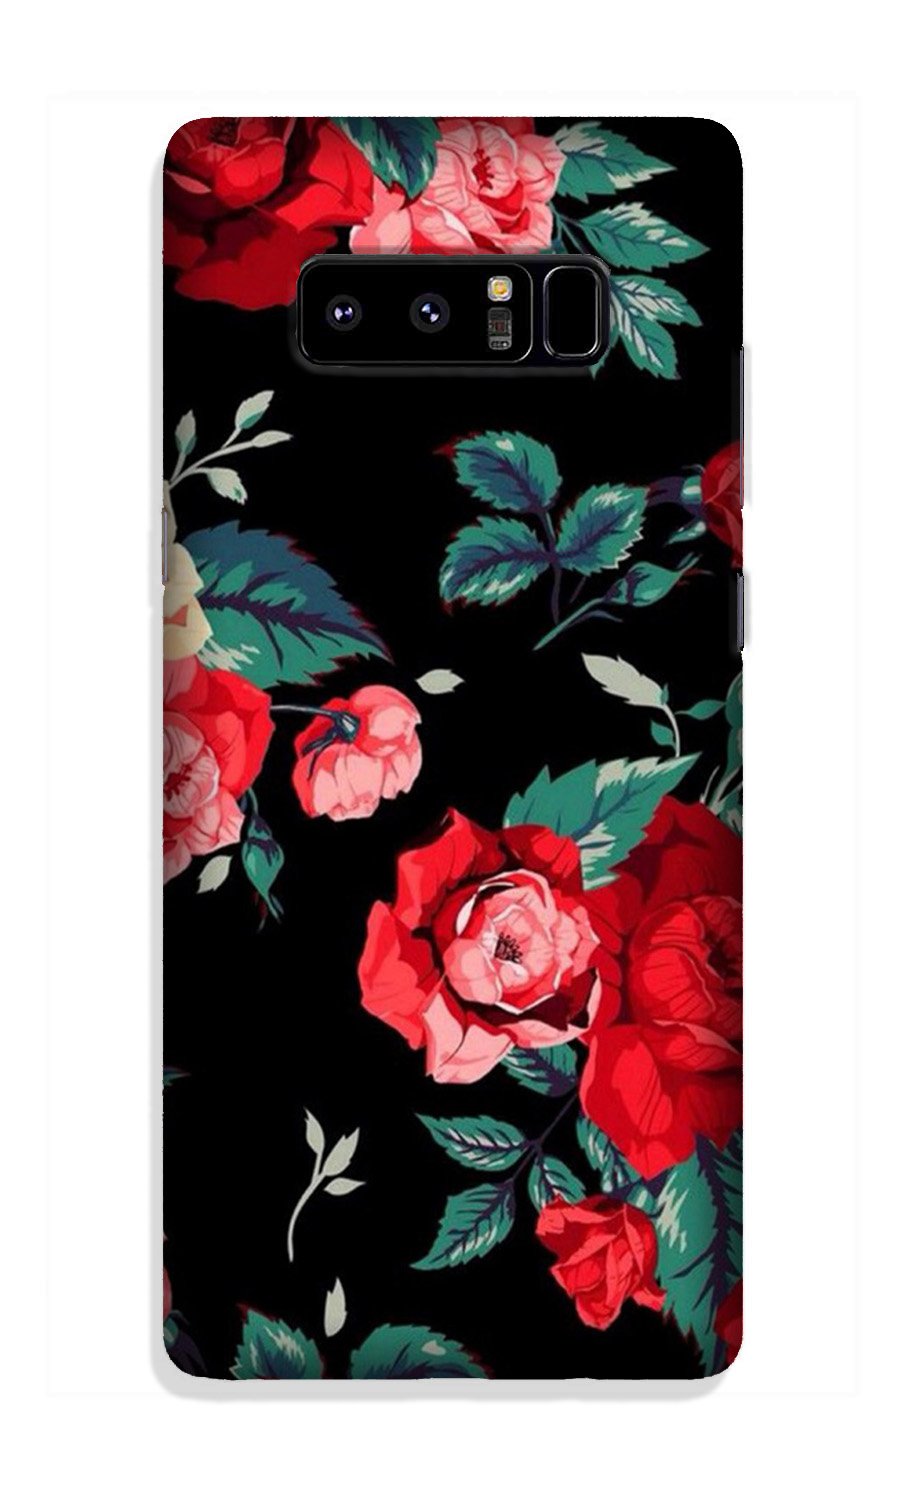 Red Rose2 Case for Galaxy Note 8